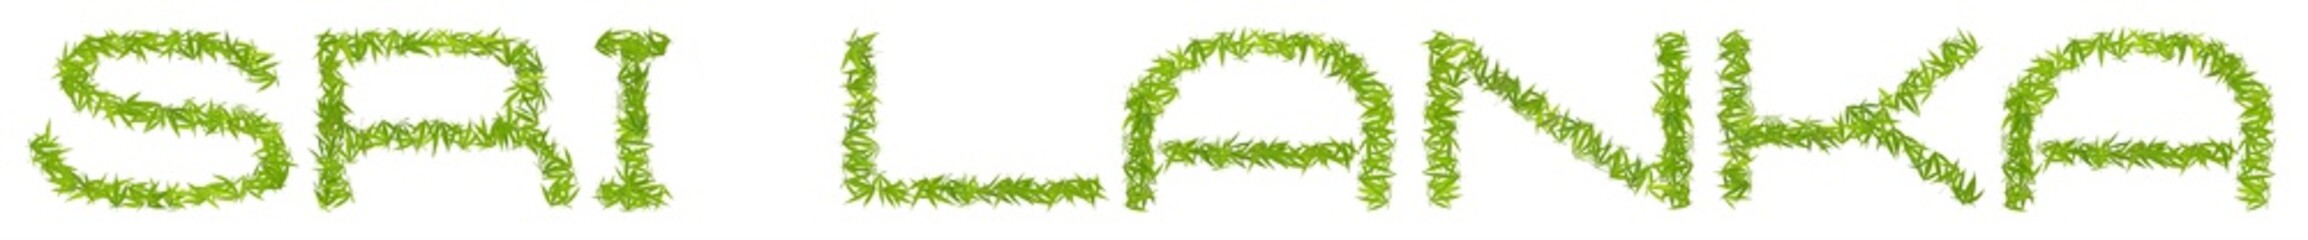 Sri lanca word laid out from marijuana leaves. Legalize concept. Cannabis letters isolated on transparent background. Design for decoration in the style of cannabis.